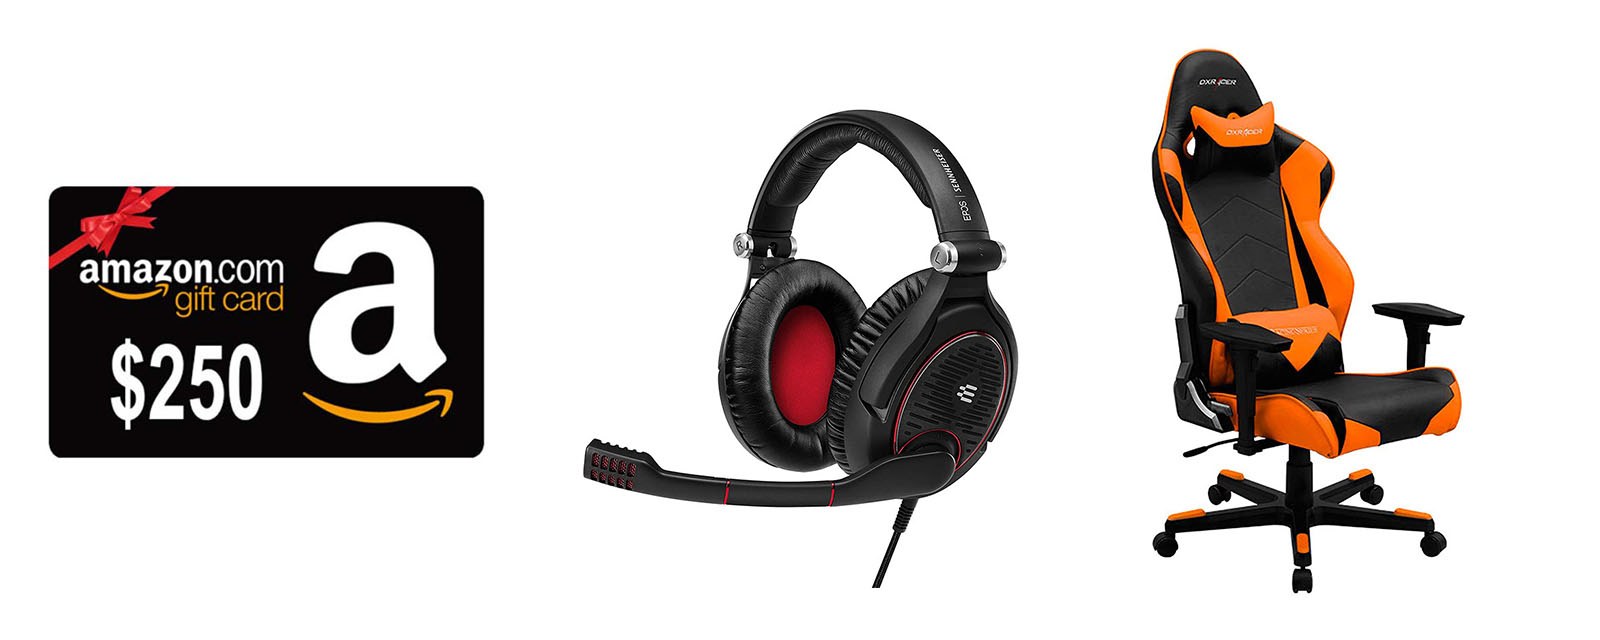 TechFest prizes include $250 Amazon Gift Card, Sennheiser Gamer Headset, and DX Racer Gamer chair